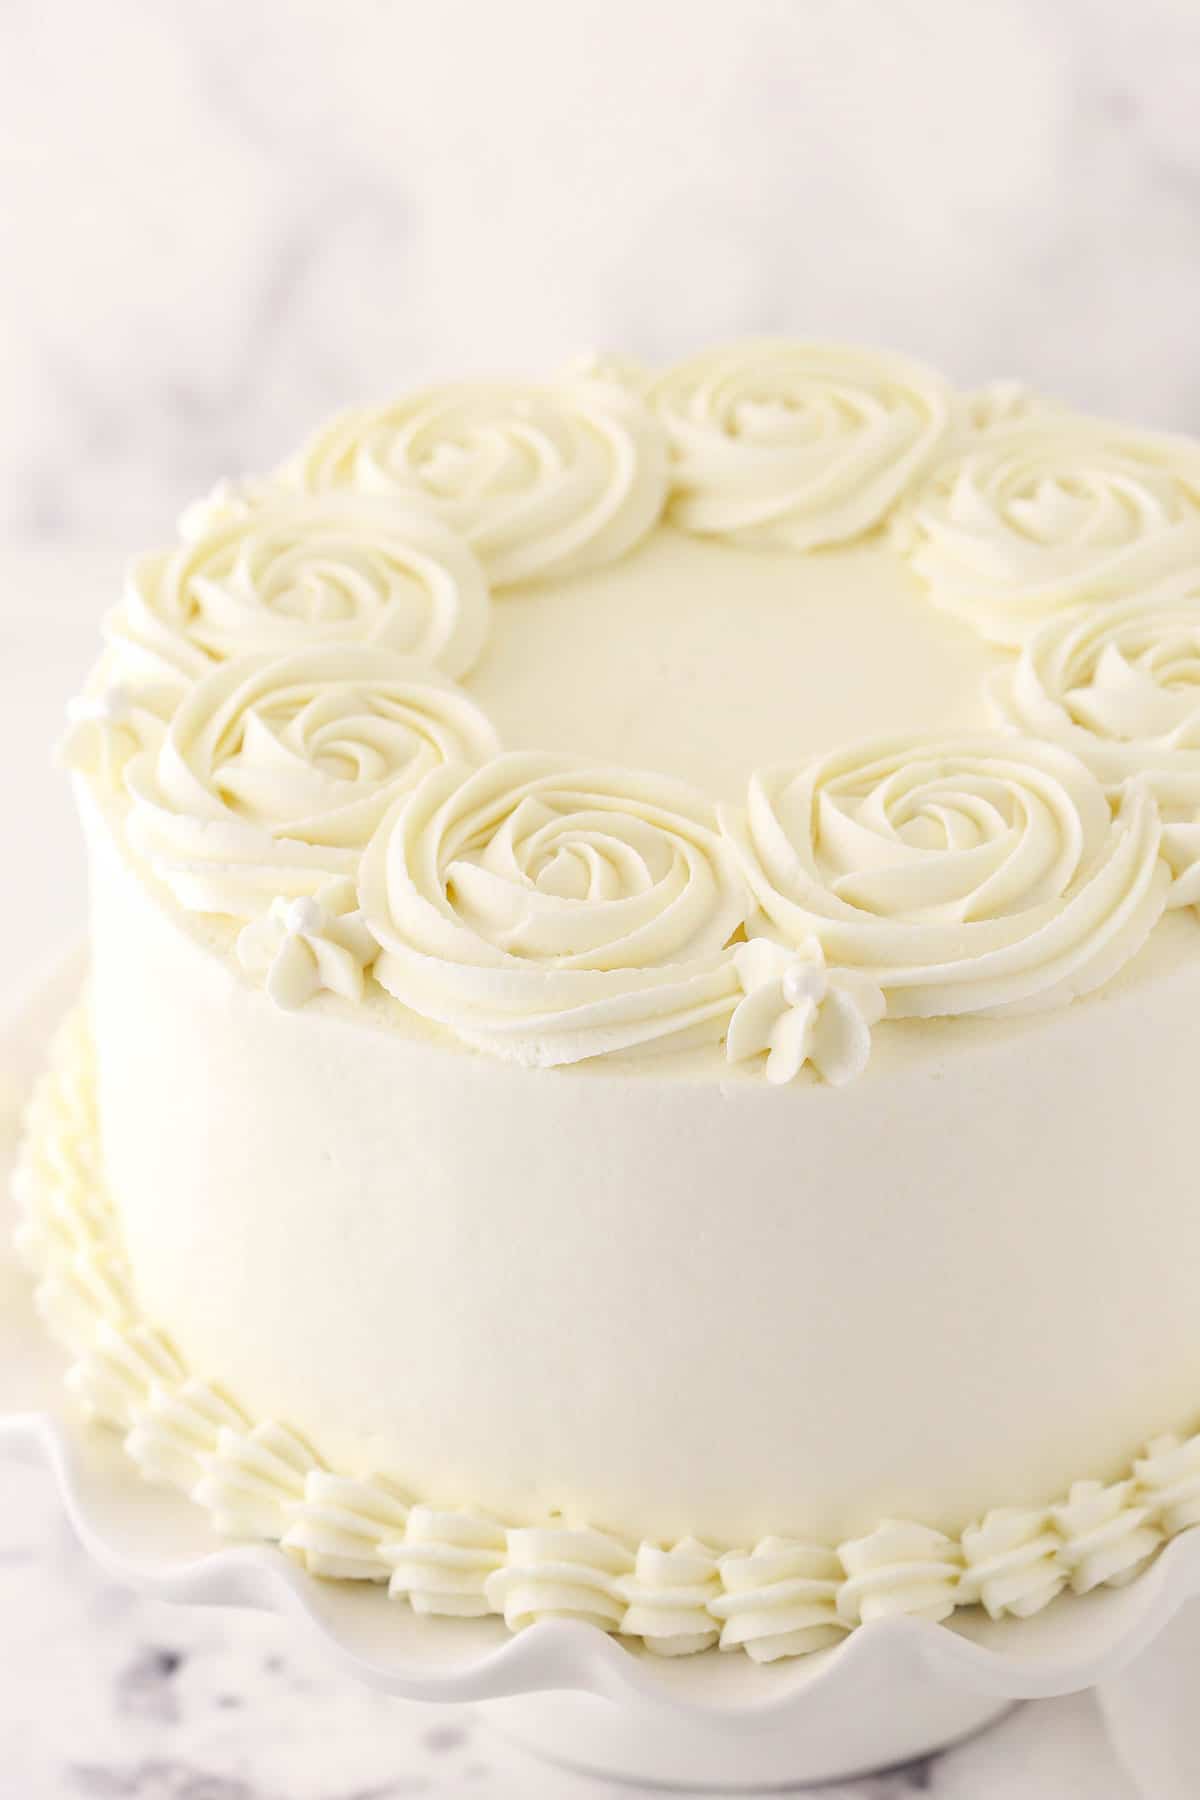 A frosted white cake with rosette designs piped around the top rim